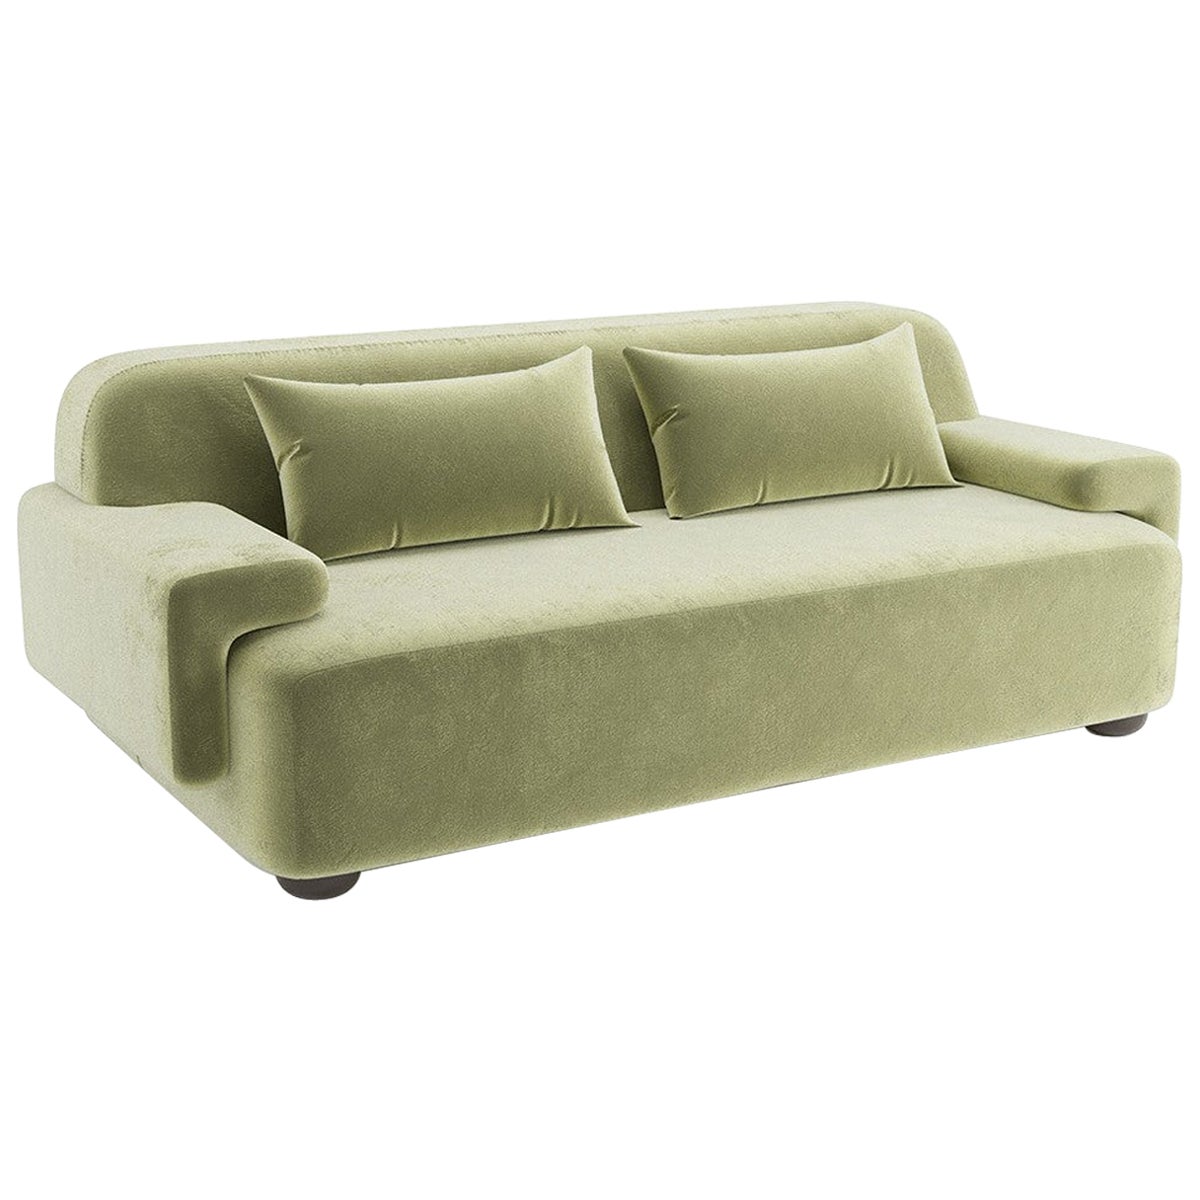 Popus Editions Lena 4 Seater Sofa in Almond Green Como Velvet Upholstery For Sale